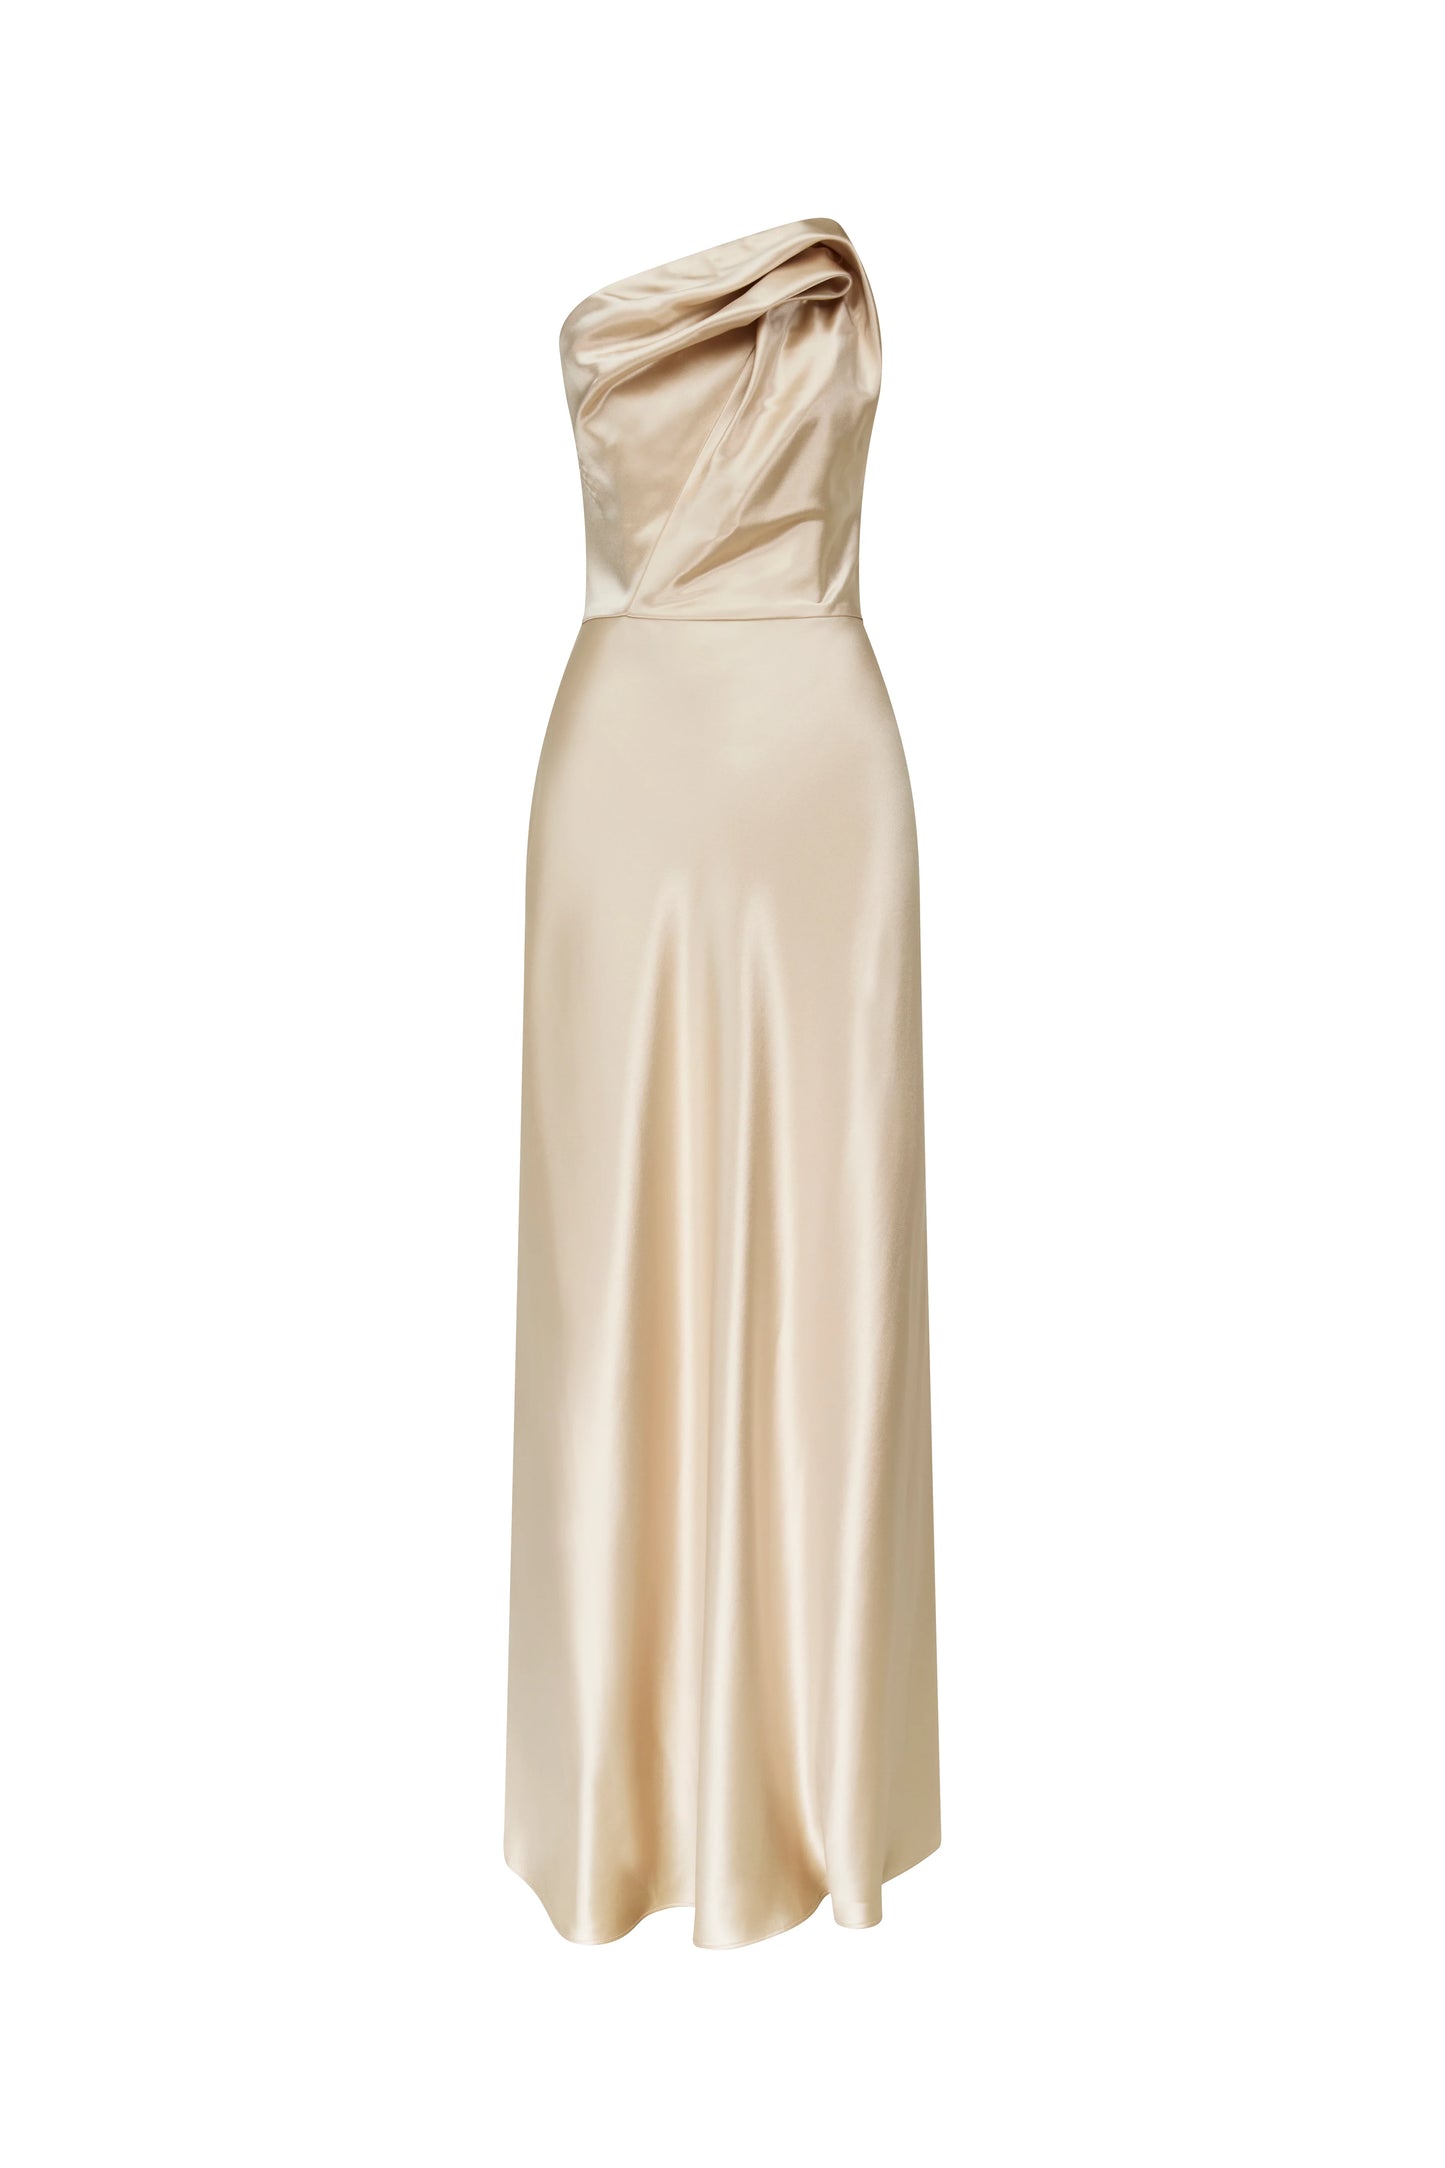 MANNING CARTELL Show Me Love Strapless Gown